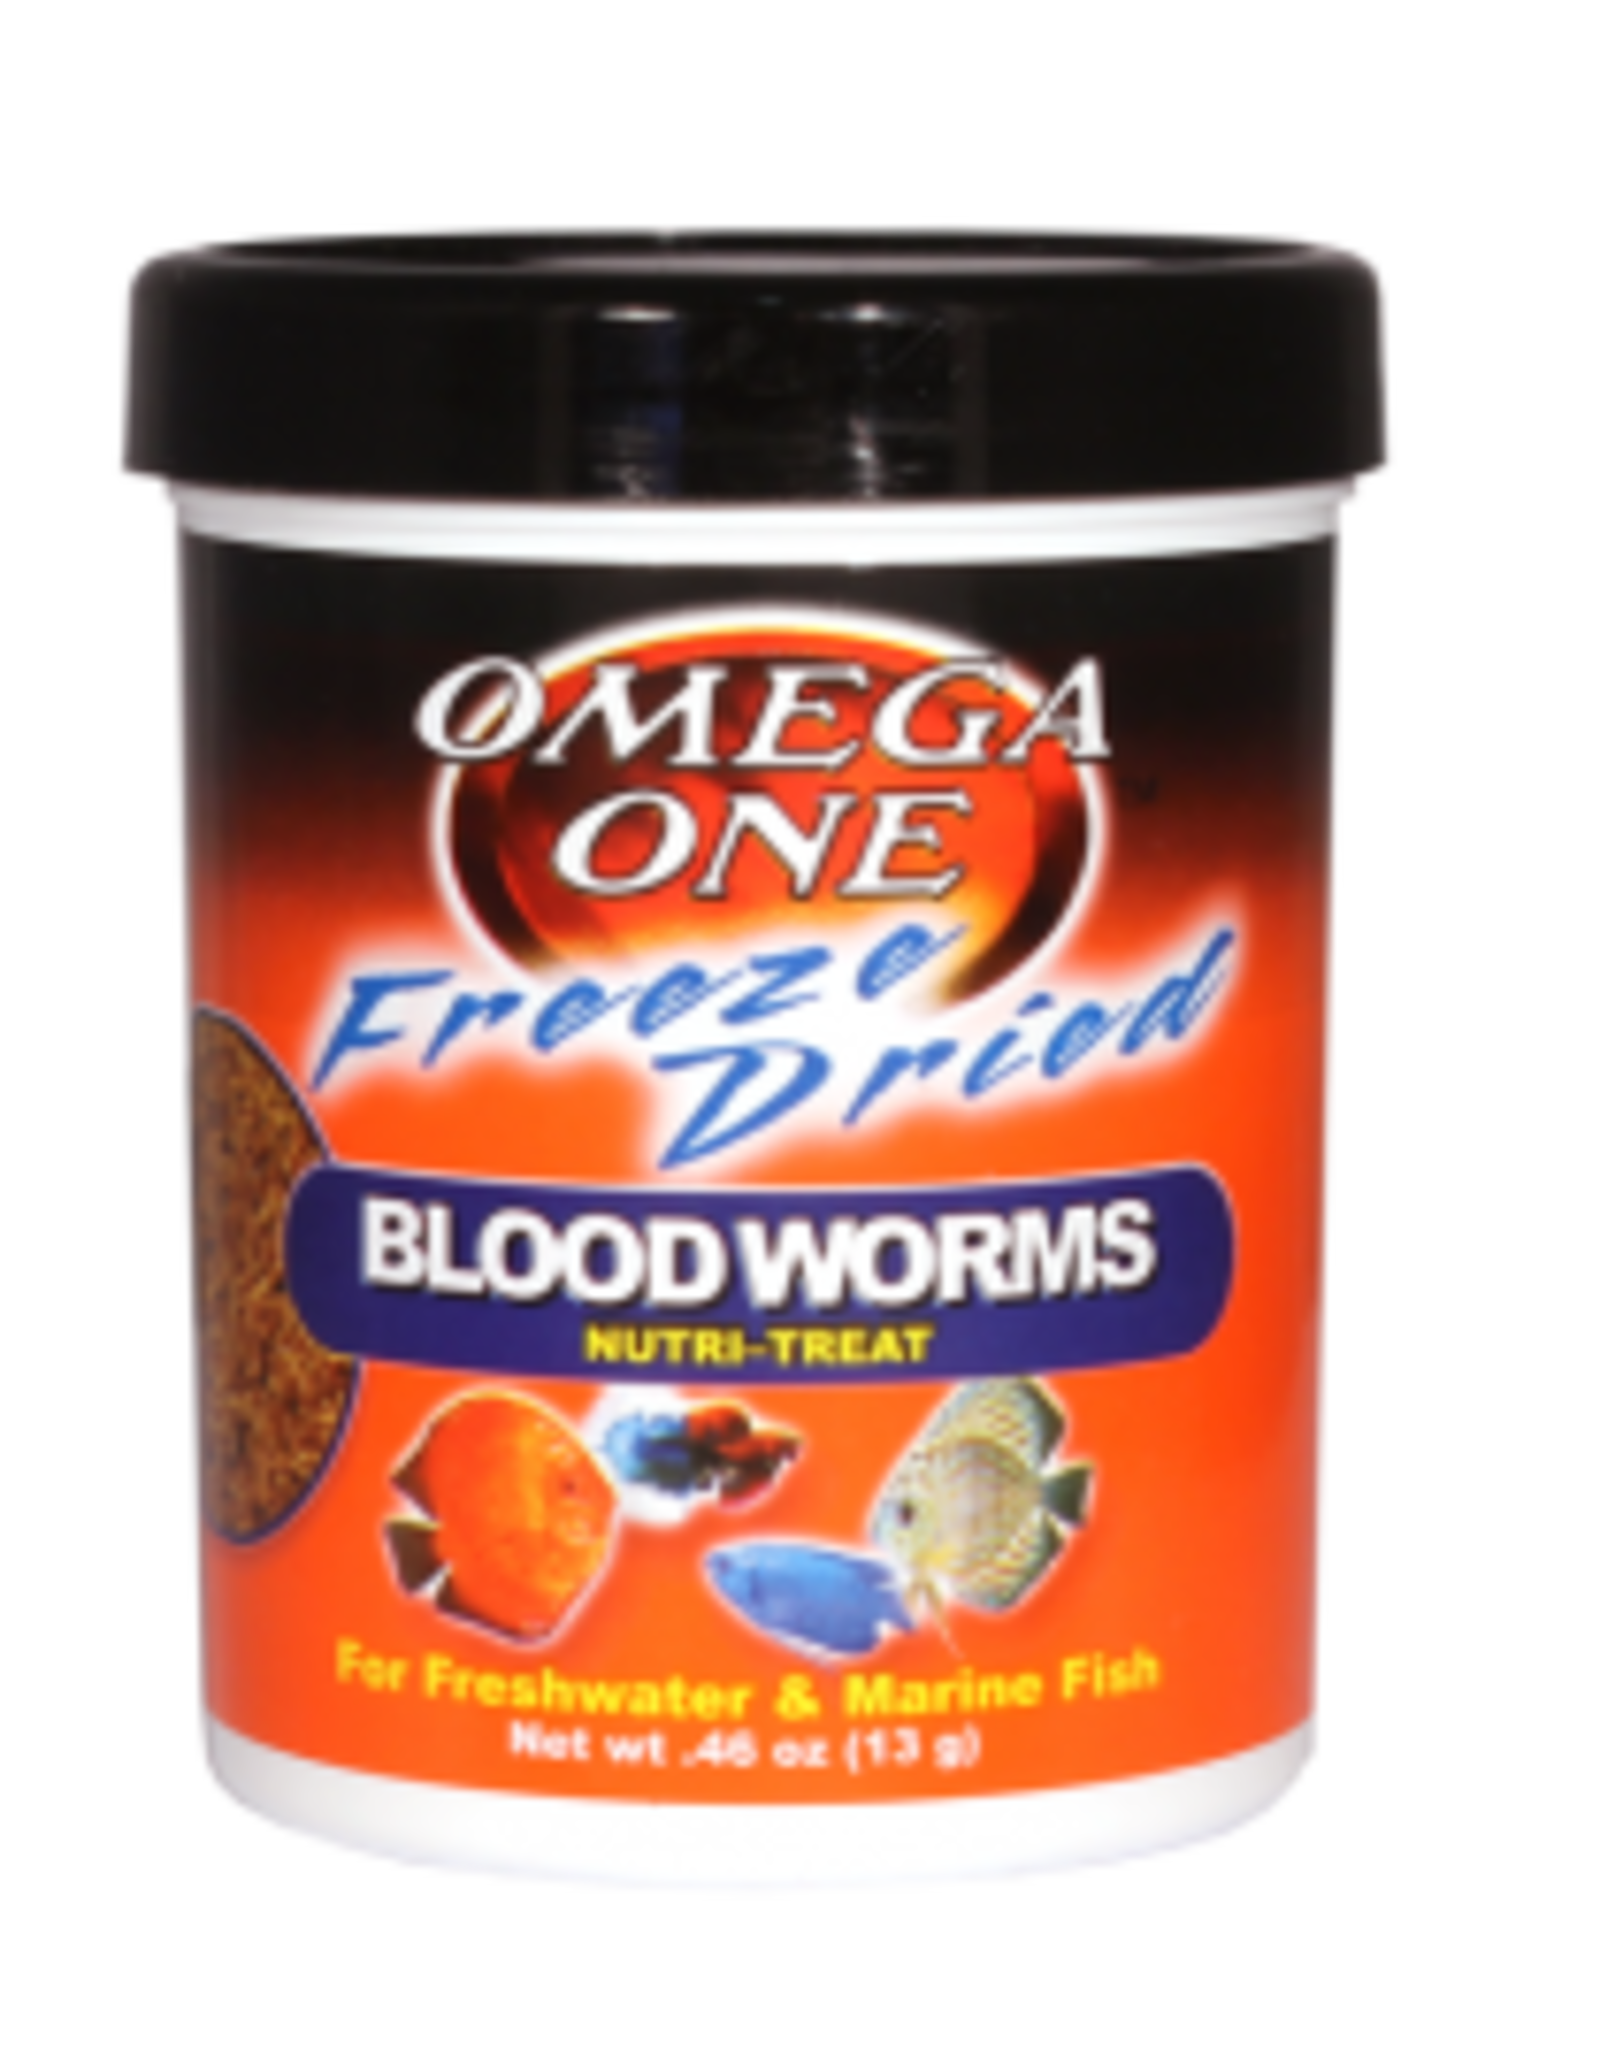 Omega One Food OMEGA ONE Freeze Dried Blood Worms